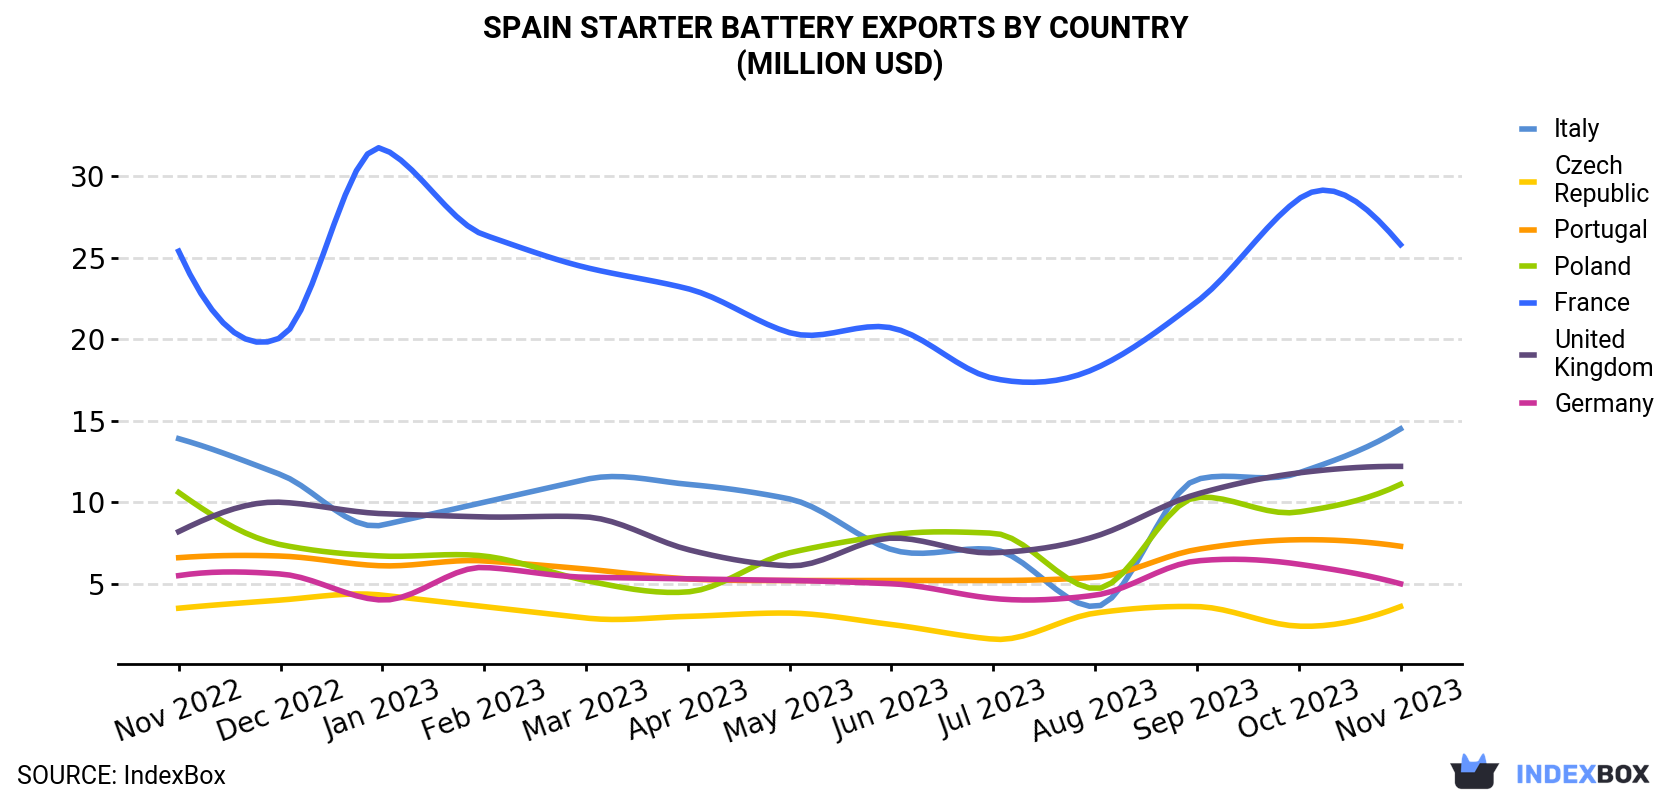 Spain Starter Battery Exports By Country (Million USD)